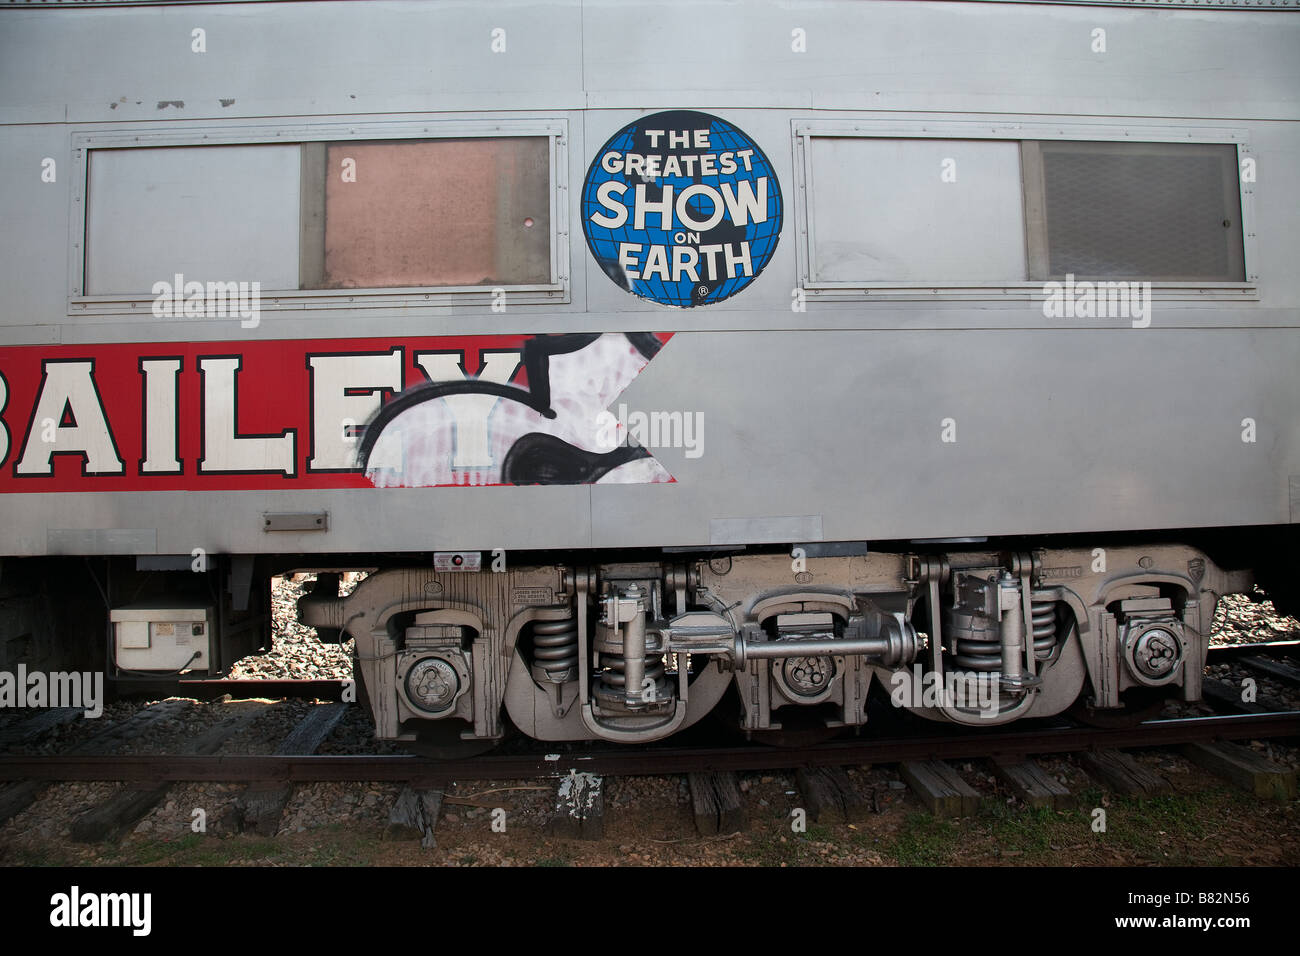 Cars from the Ringling Brothers and Barnum Bailey circus train which carries elephants and other large animals  Stock Photo